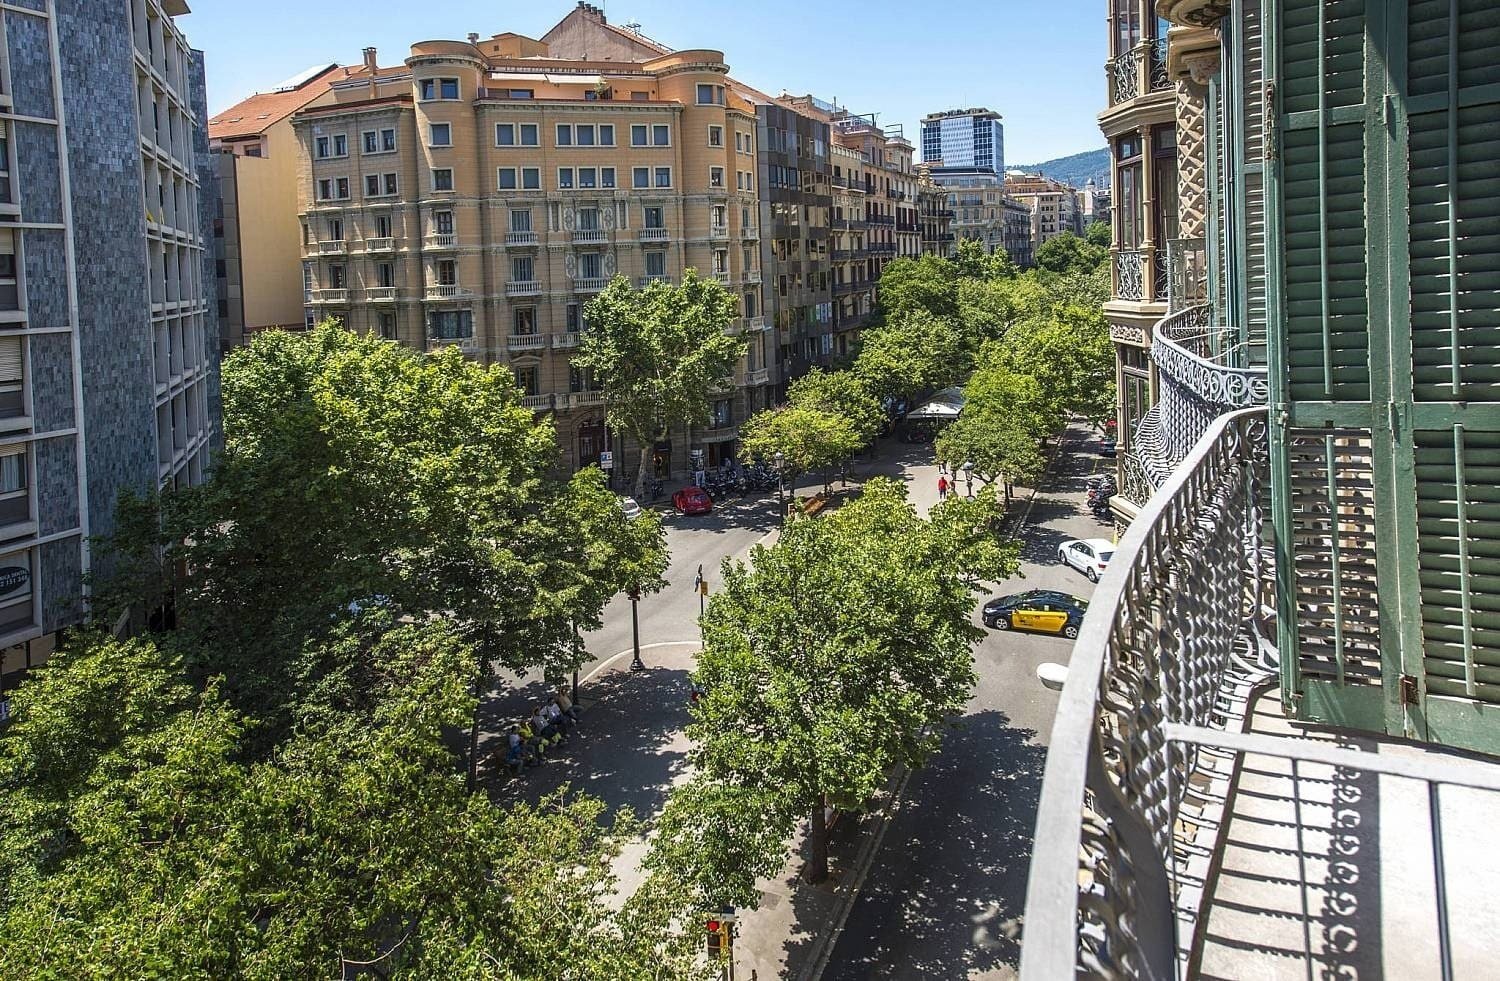 View of Barcelona from the balcony of the Hotel Boutique Mosaic by Ona Hotels